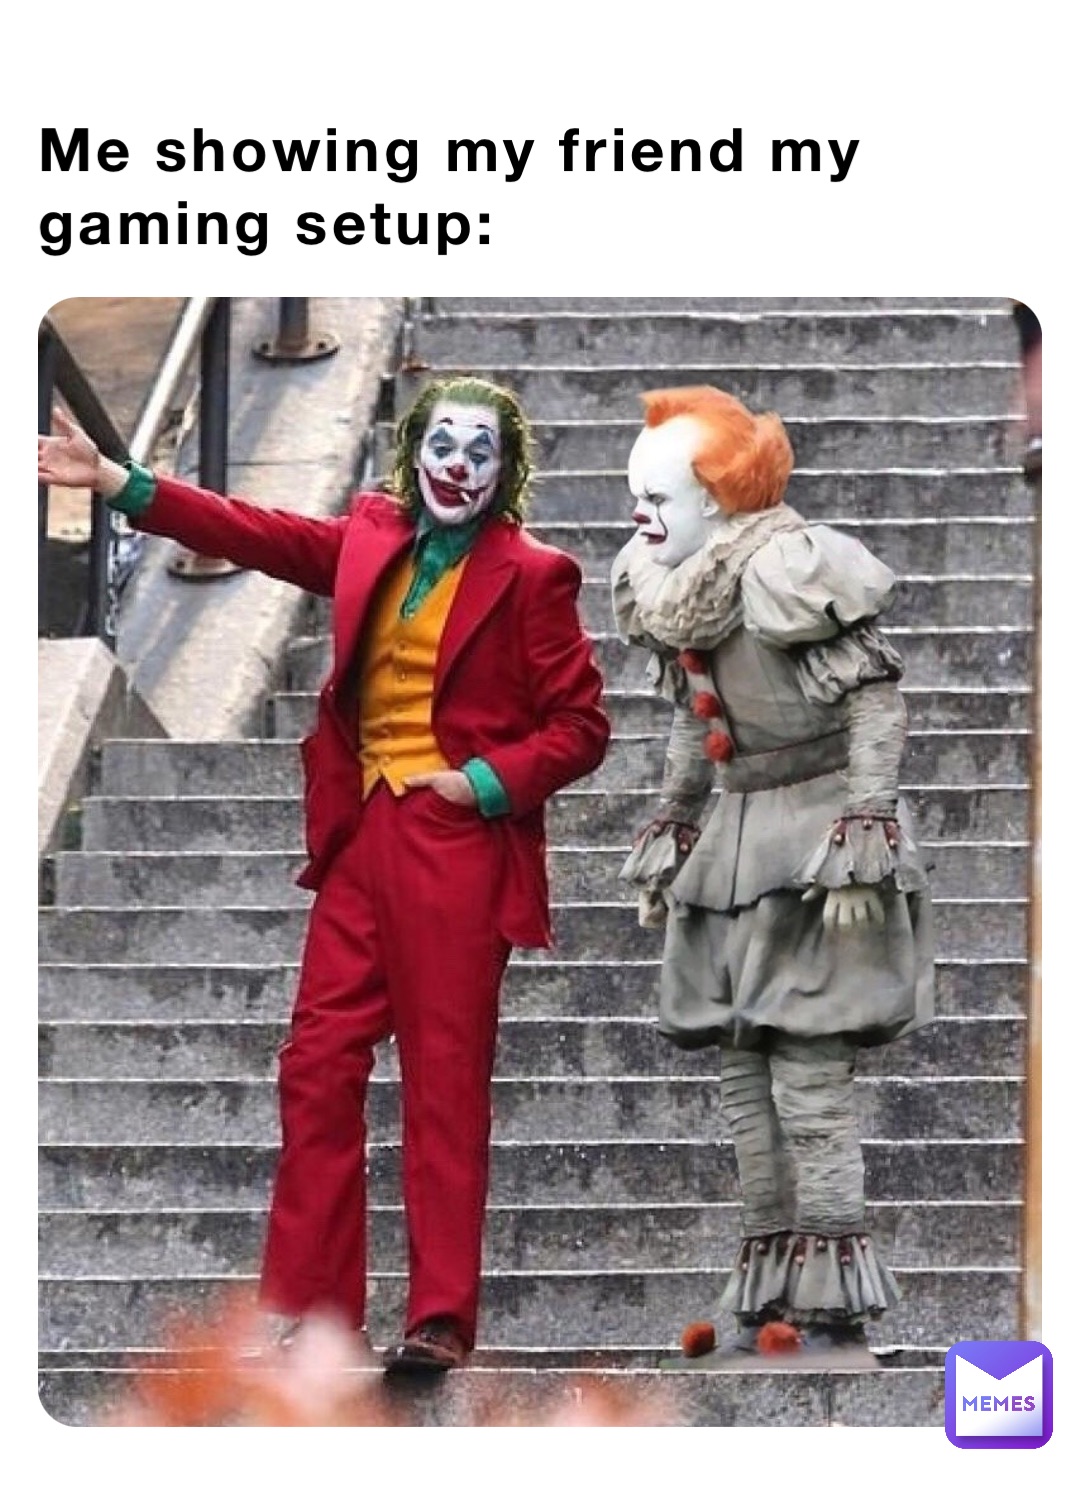 Me showing my friend my gaming setup: